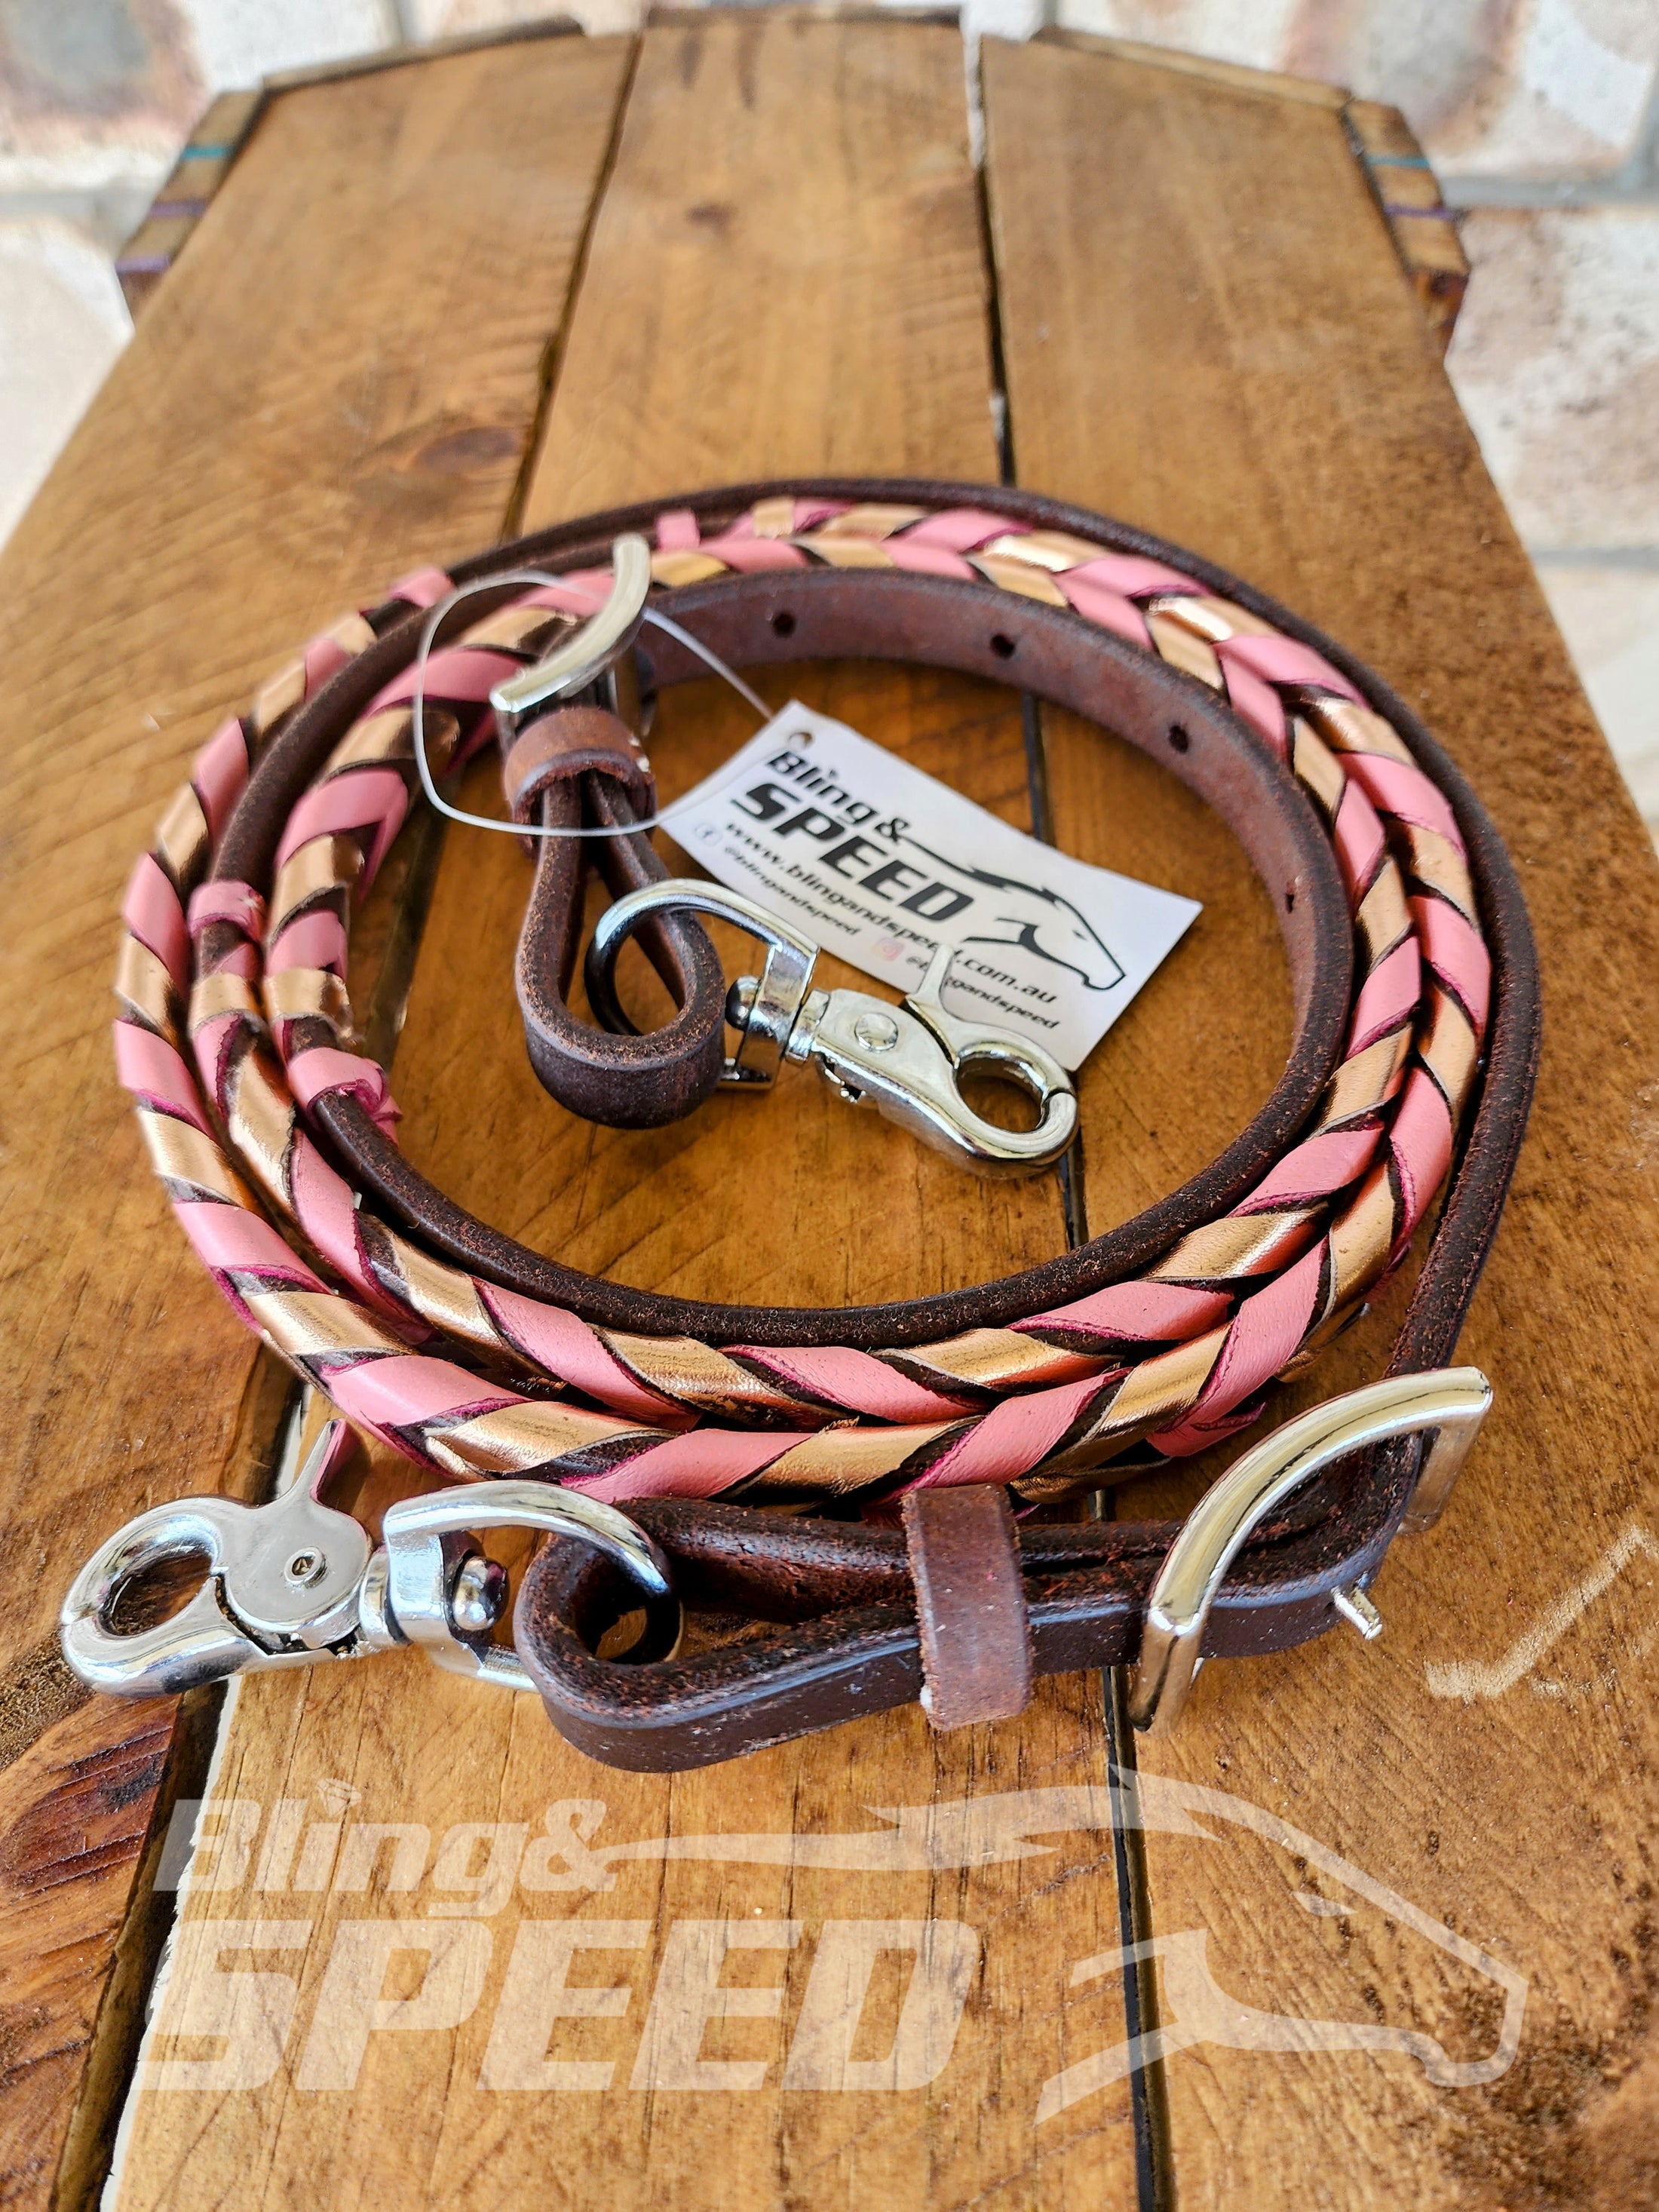 Bling and Speed Pink & Rose Gold Laced Barrel Reins (7956249936110)